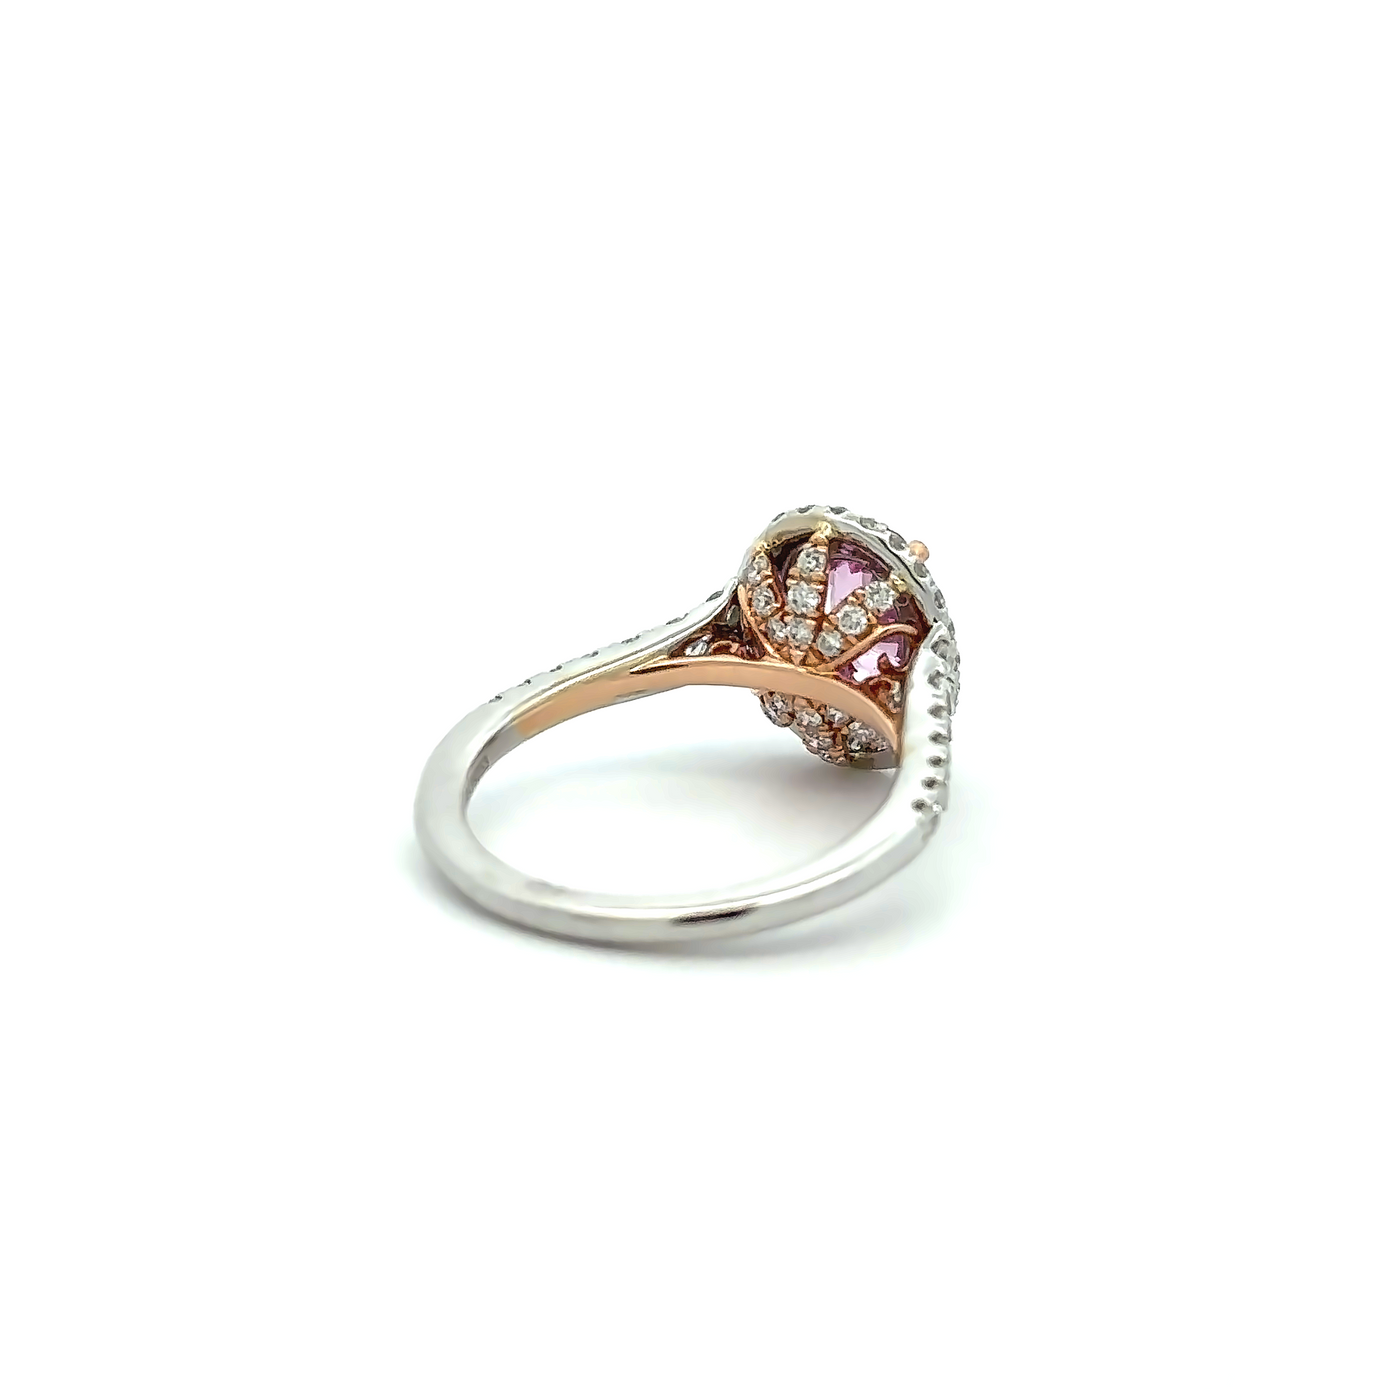 14 Karat White Gold Pink Sapphire and Diamond Double Halo Ring